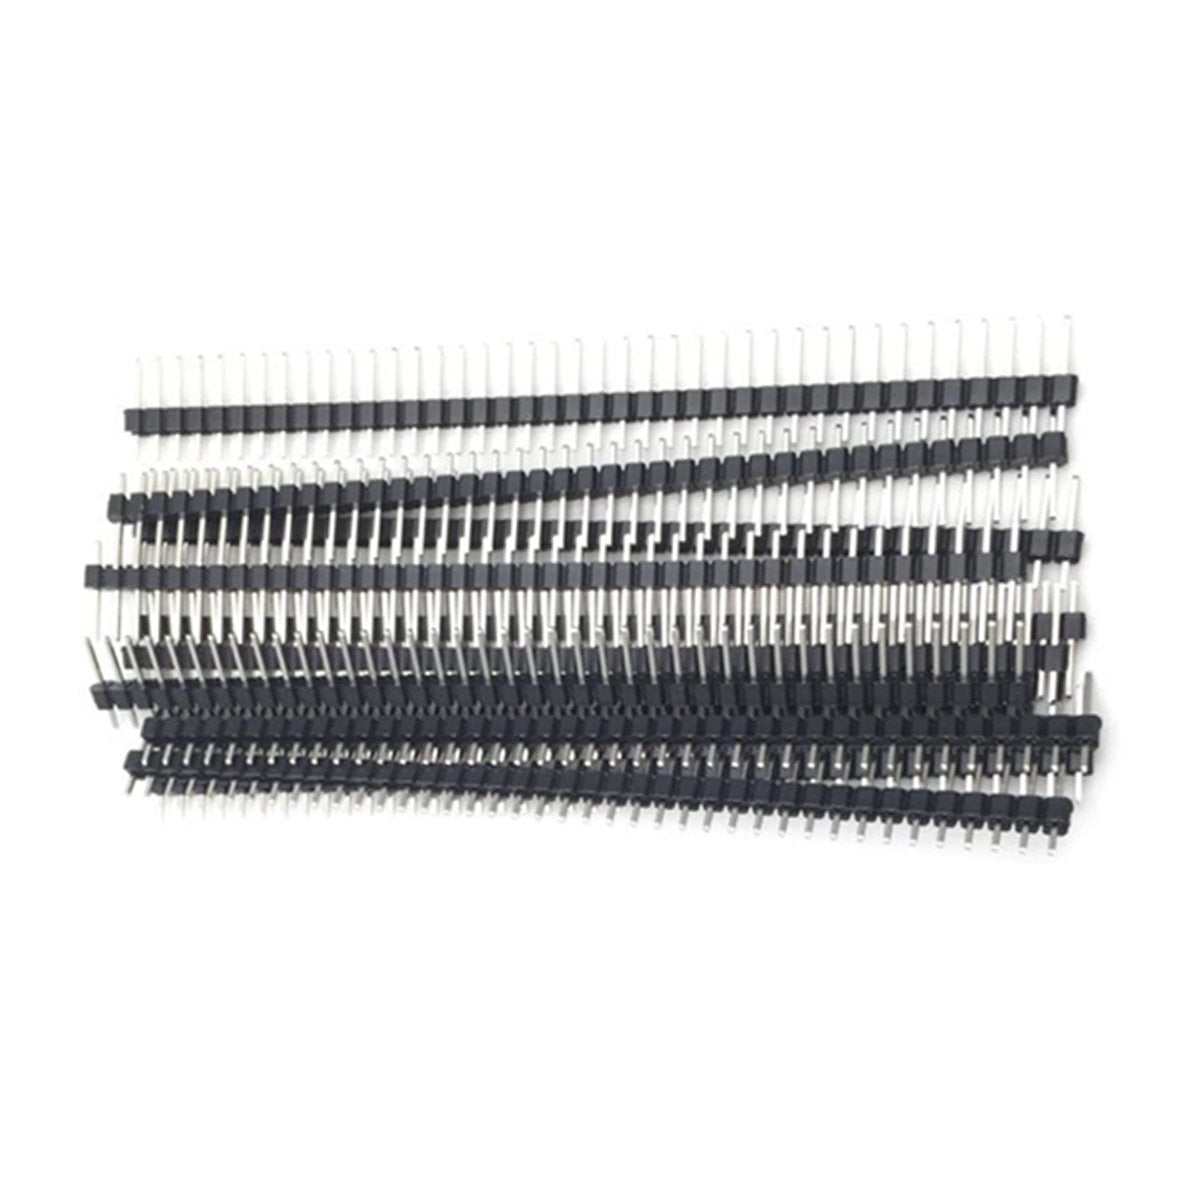 2pcs 40 Pin 1x40 Single Row Female Male 2.54mm Pitch Header Straight Right Angle Adapter - 2x Male Header - - Asia Sell